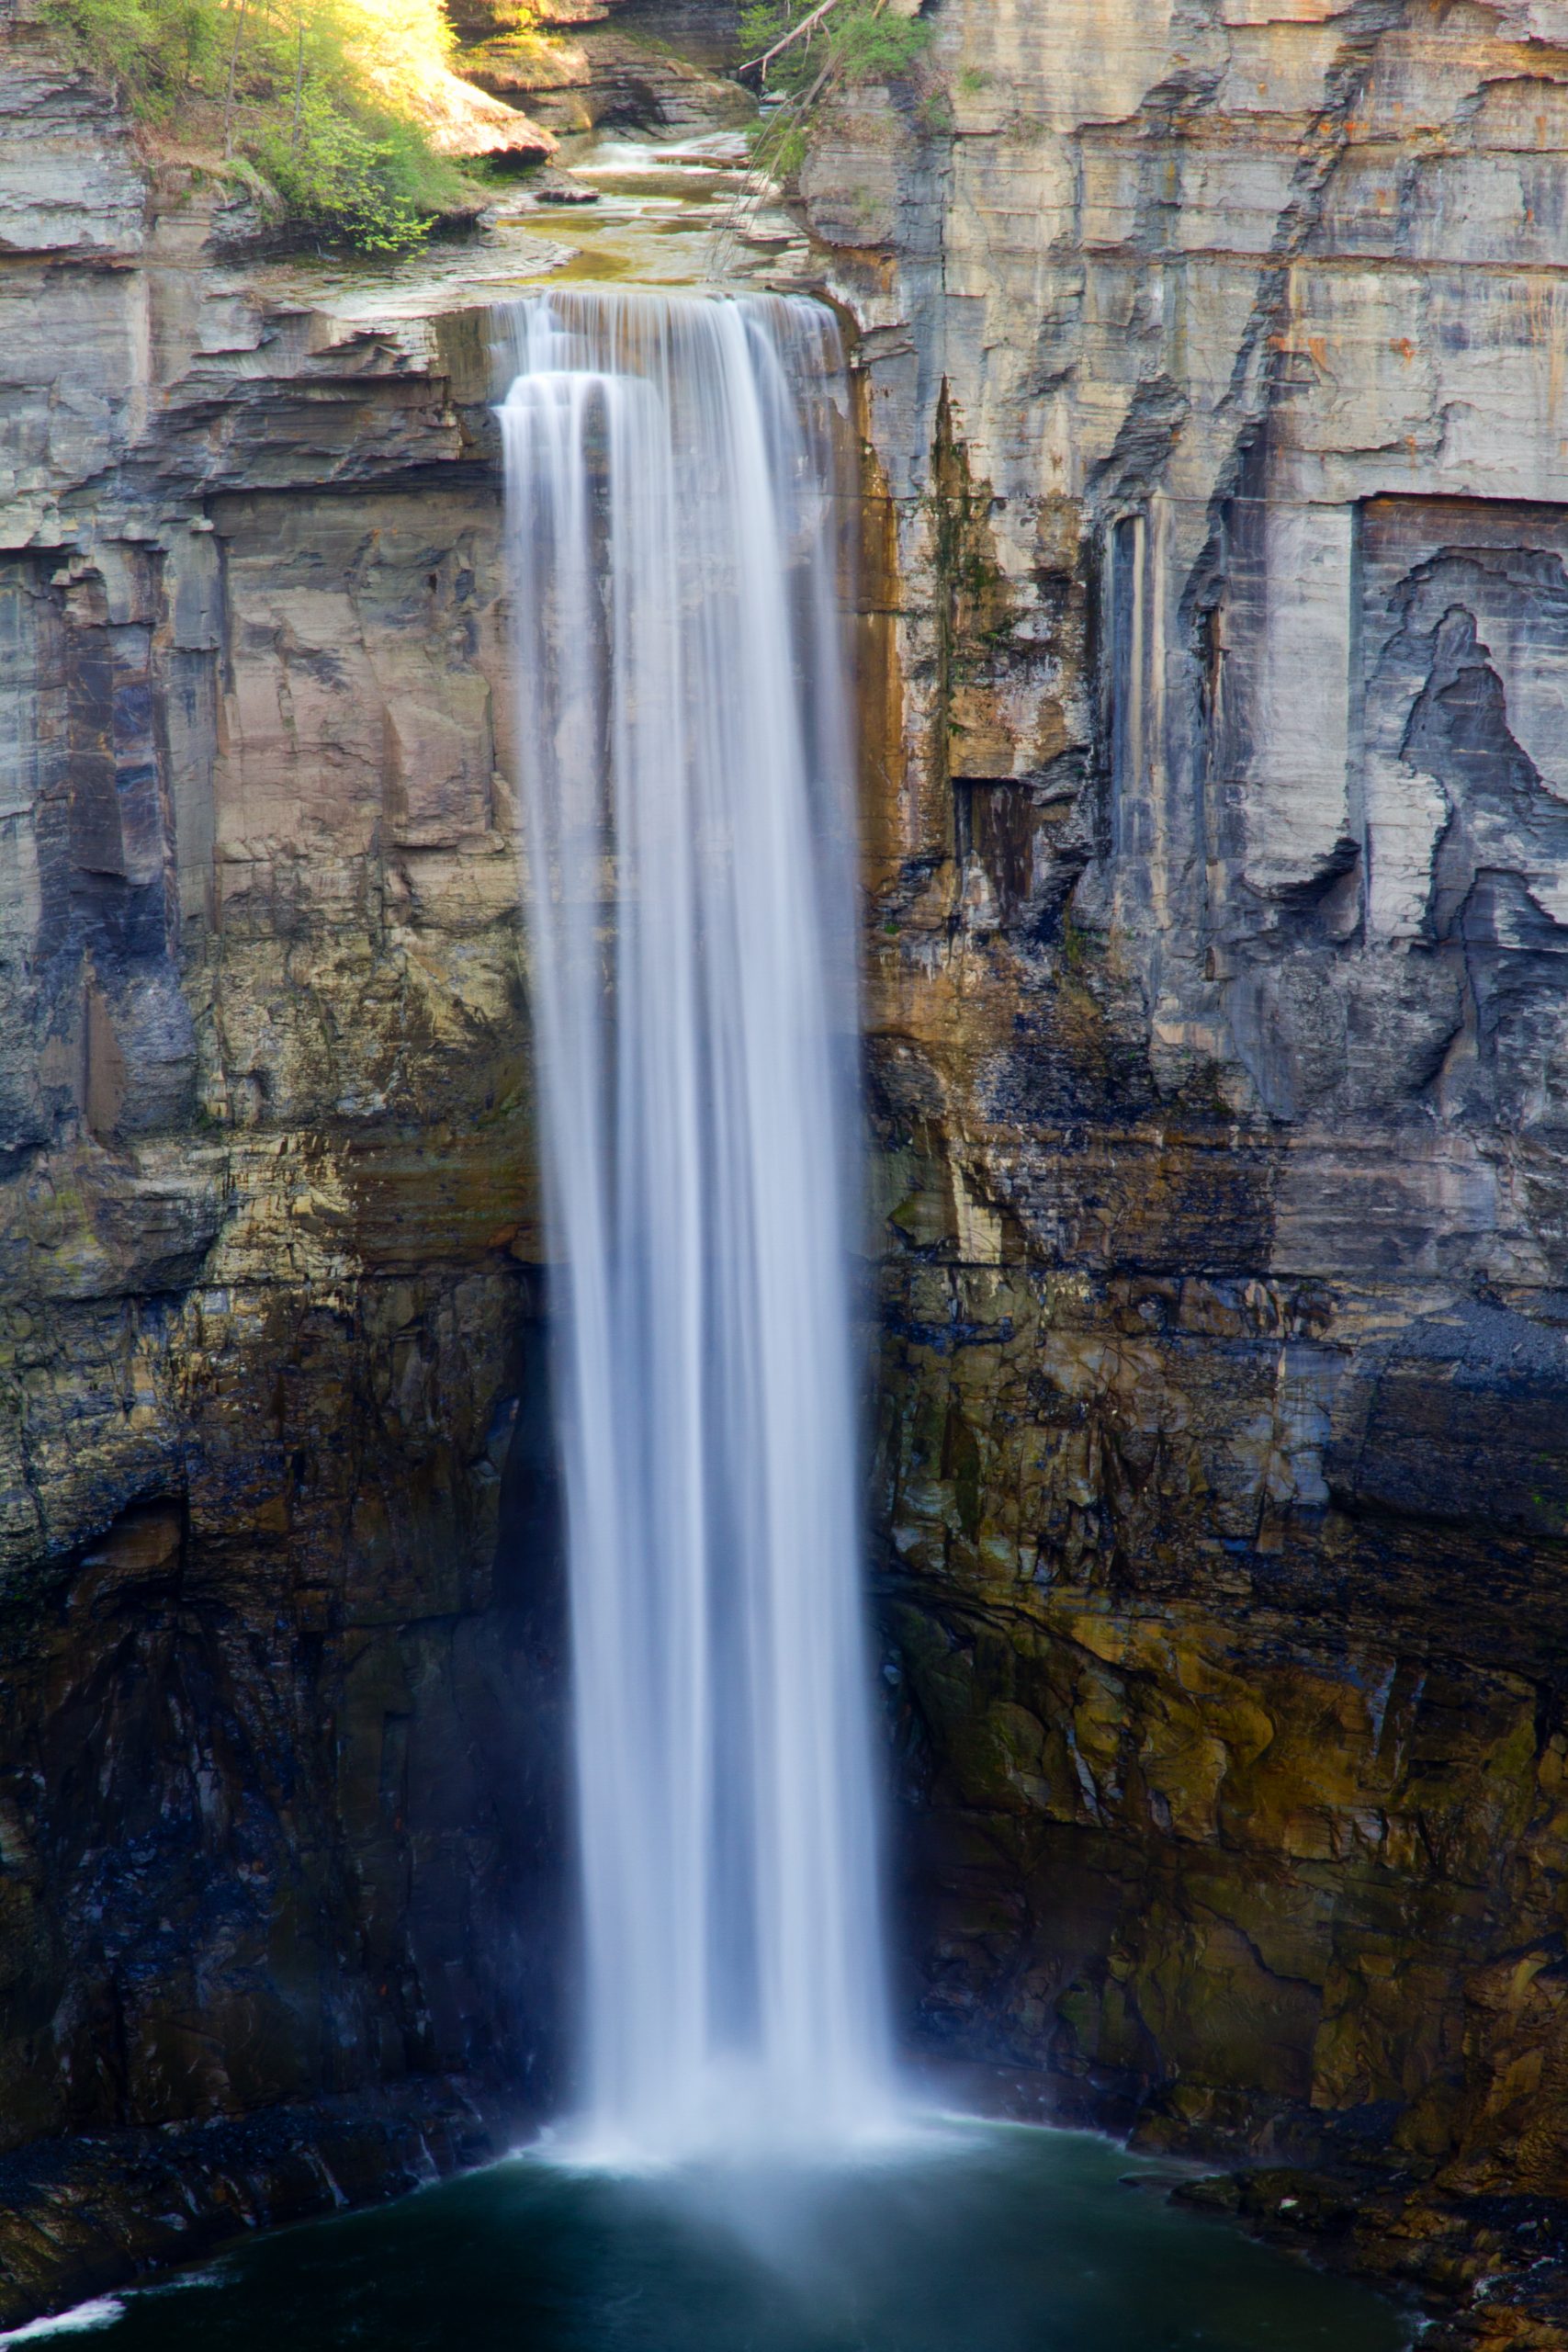 A waterfall is shown, which acts as a metaphor for the legal concept of collaborative law in Rochester, NY